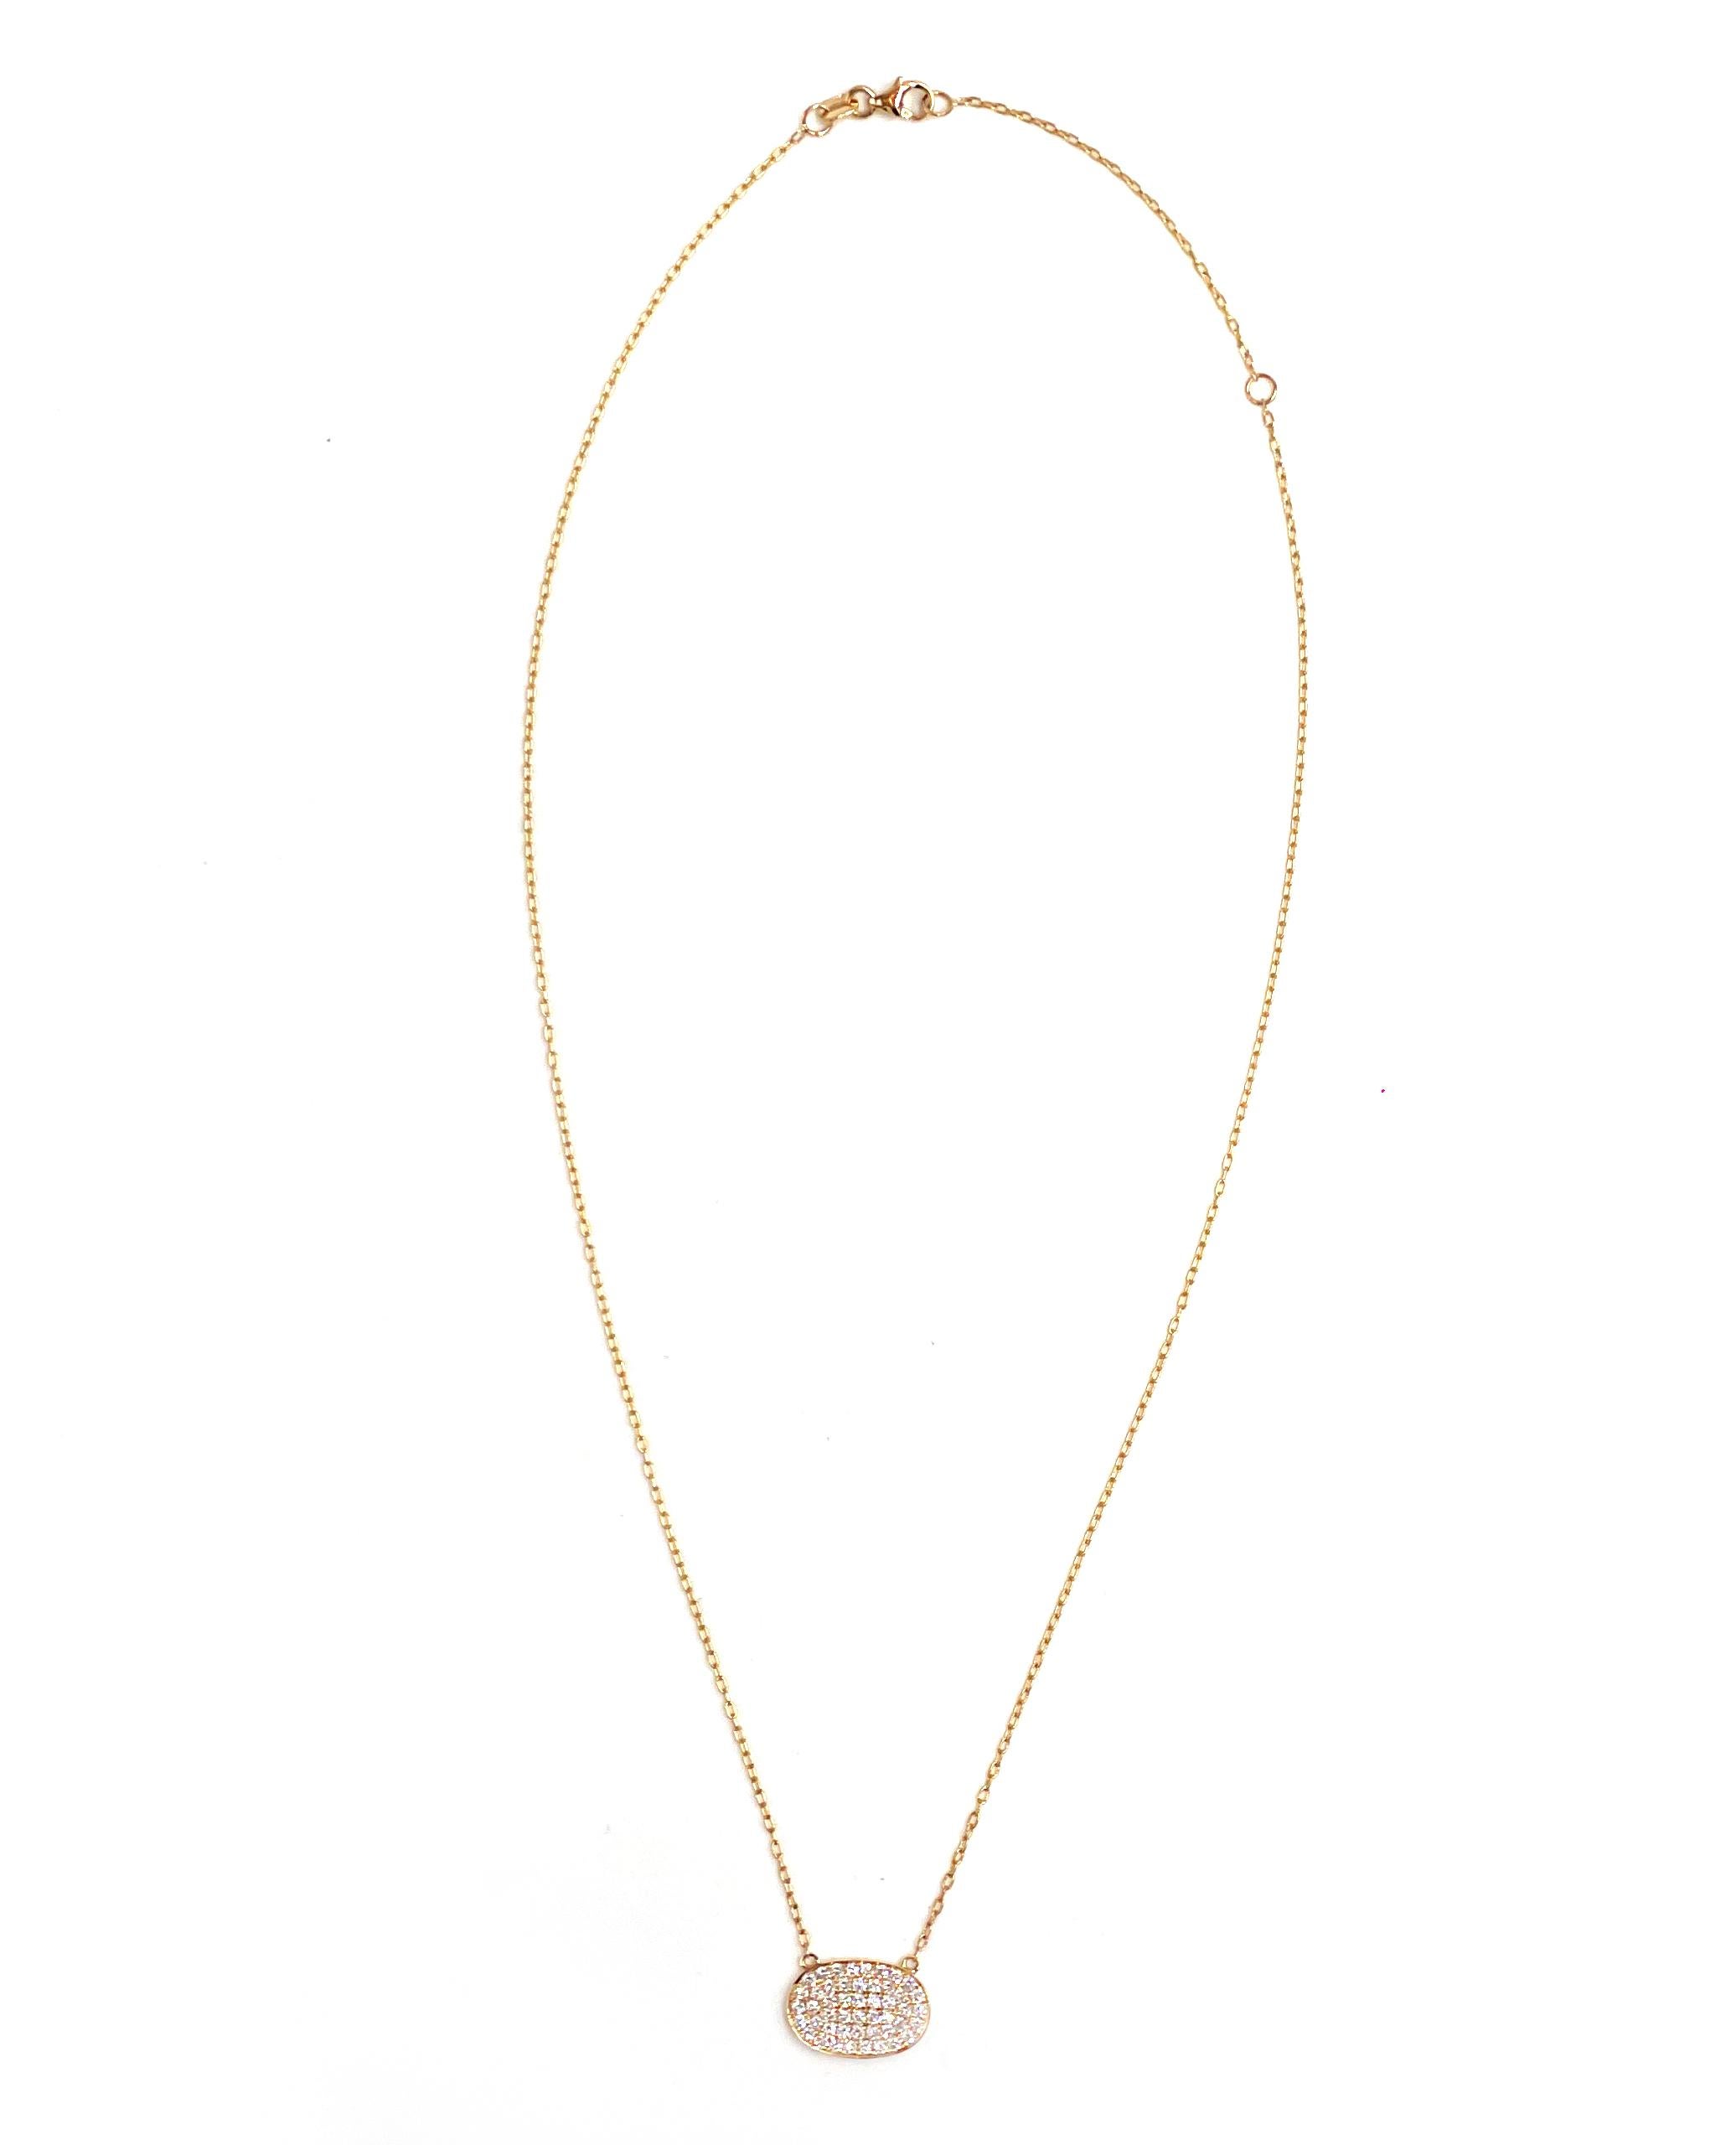 18K yellow gold East-West oval shape necklace with 0.66 carat pave set round, brilliant-cut diamonds.

* Diamonds are G/H color, VS2/SI1 clarity.
* Can be worn 18 inches or 16 inches long.